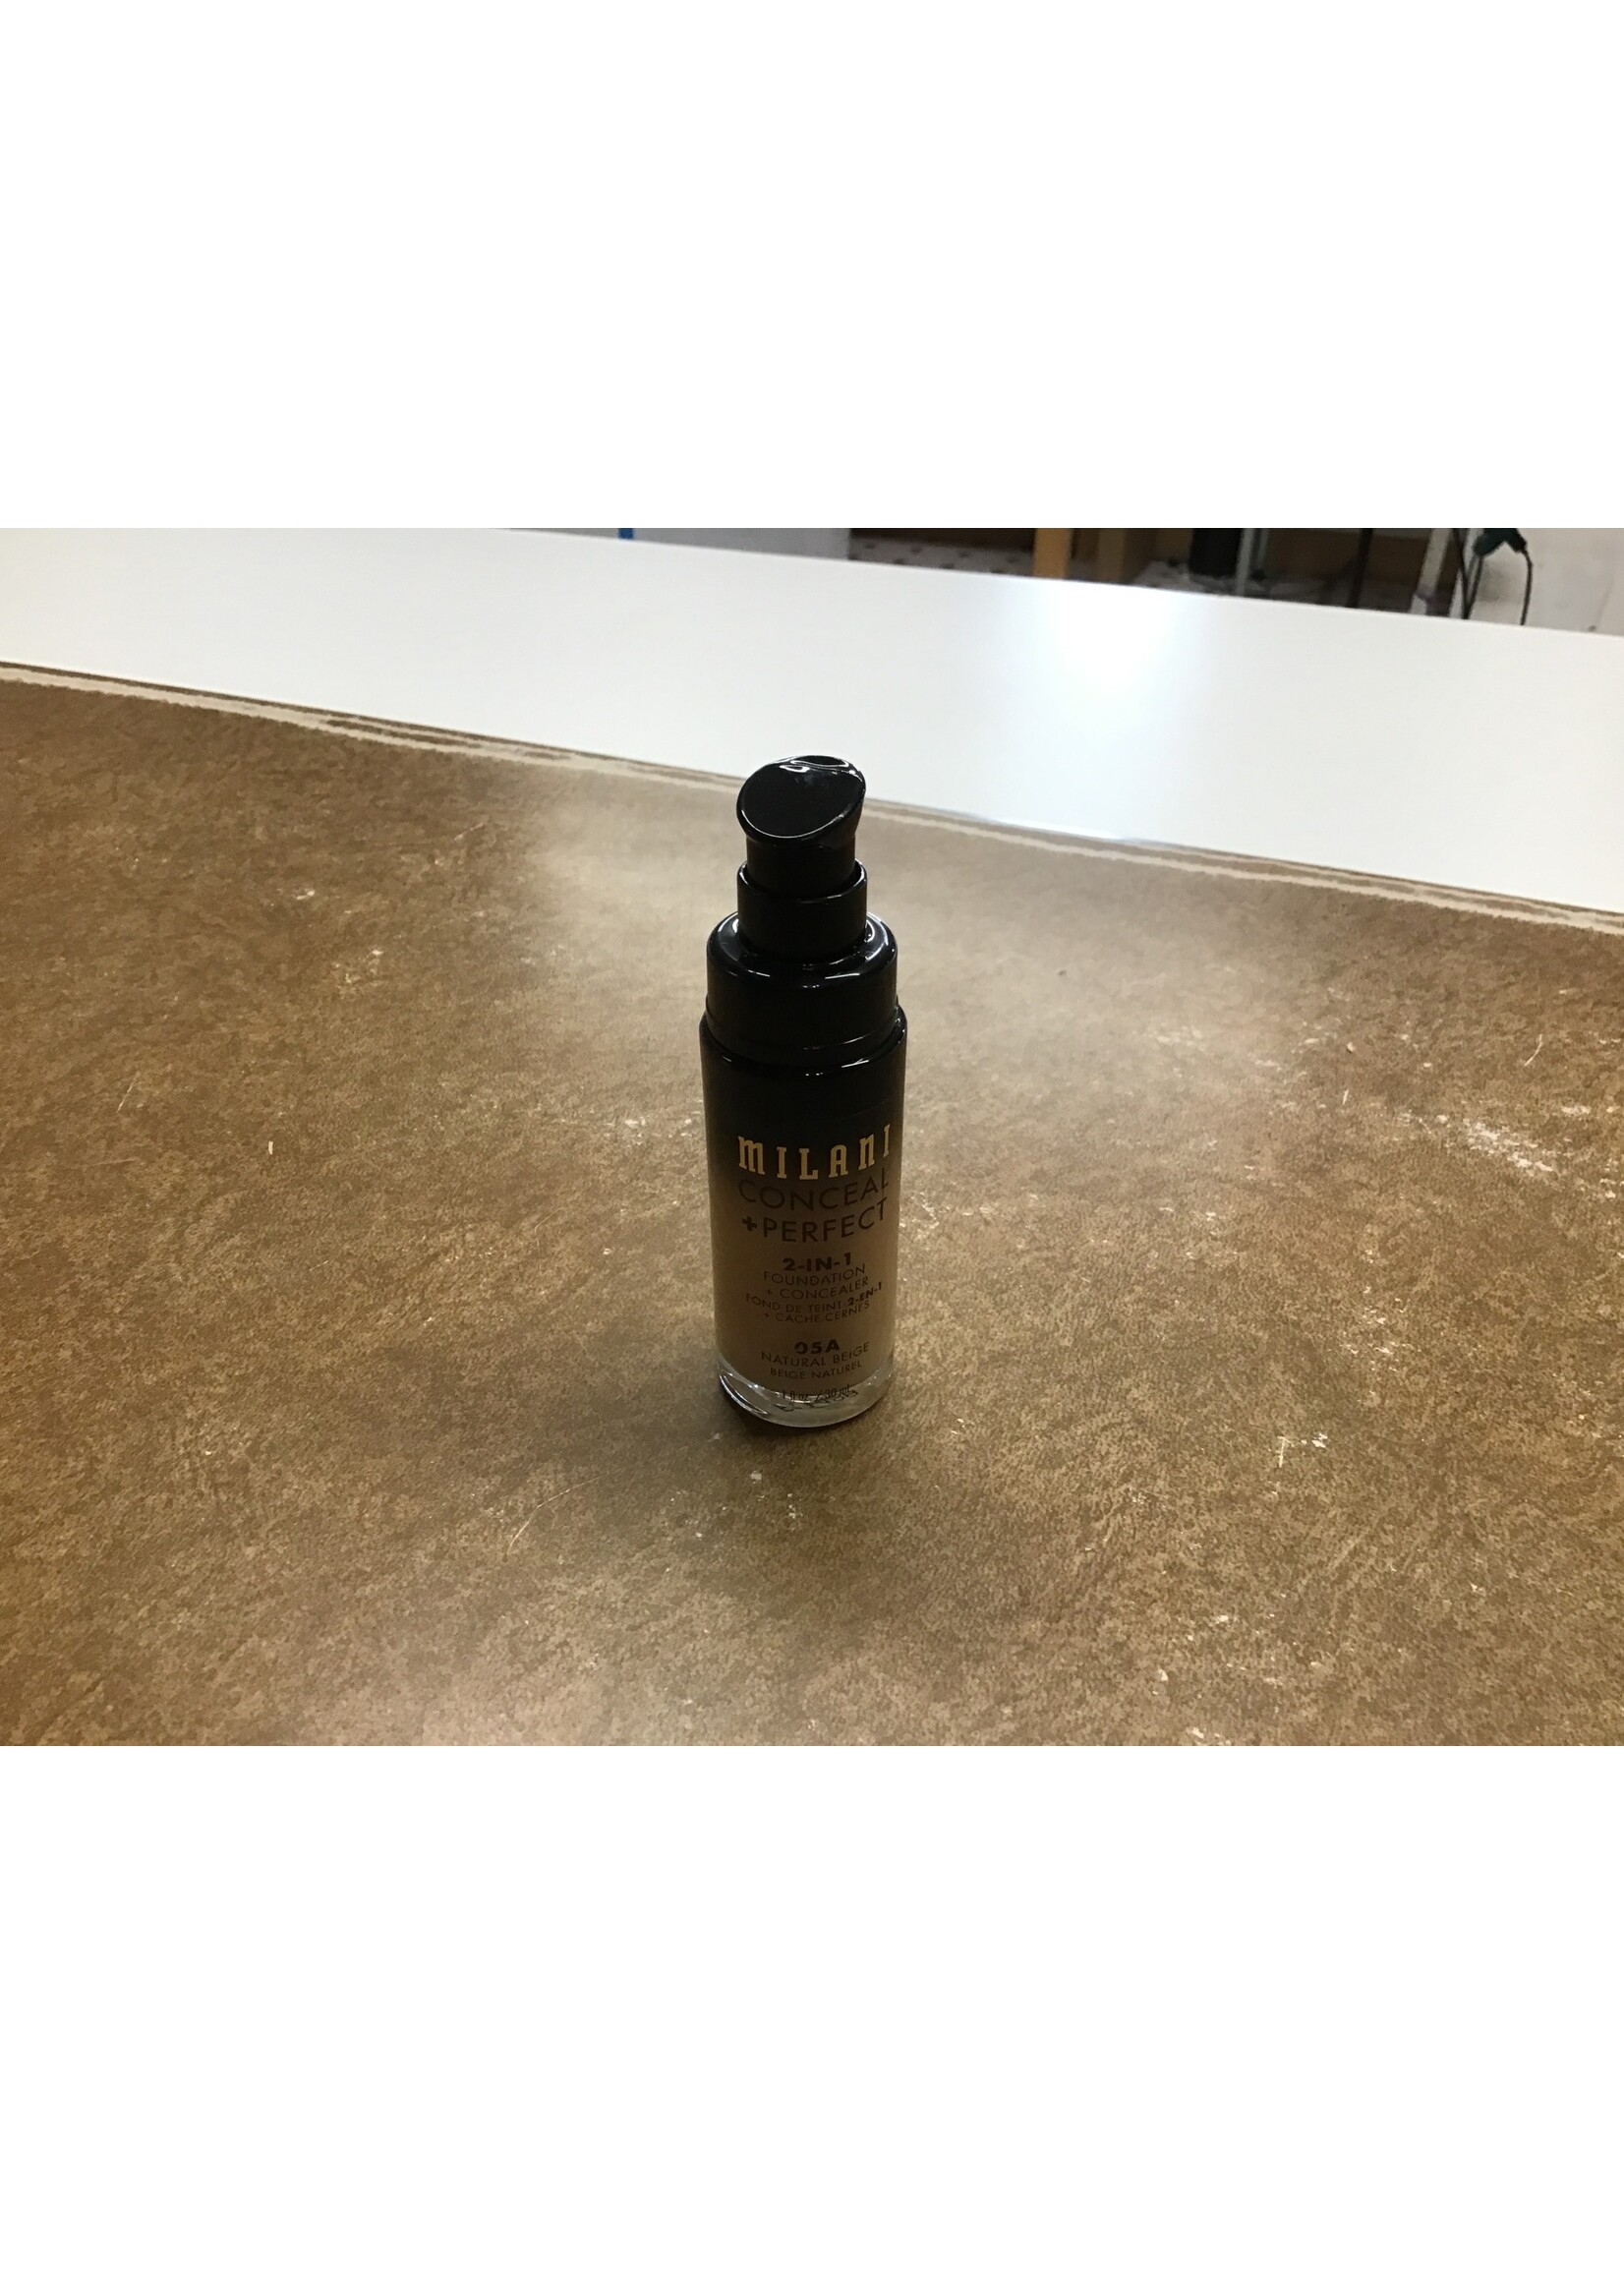 *no cap* Milani Conceal + Perfect 2-in-1 Foundation + Concealer Cruelty-Free Liquid Foundation - 05A Natural Beige - 1 fl oz